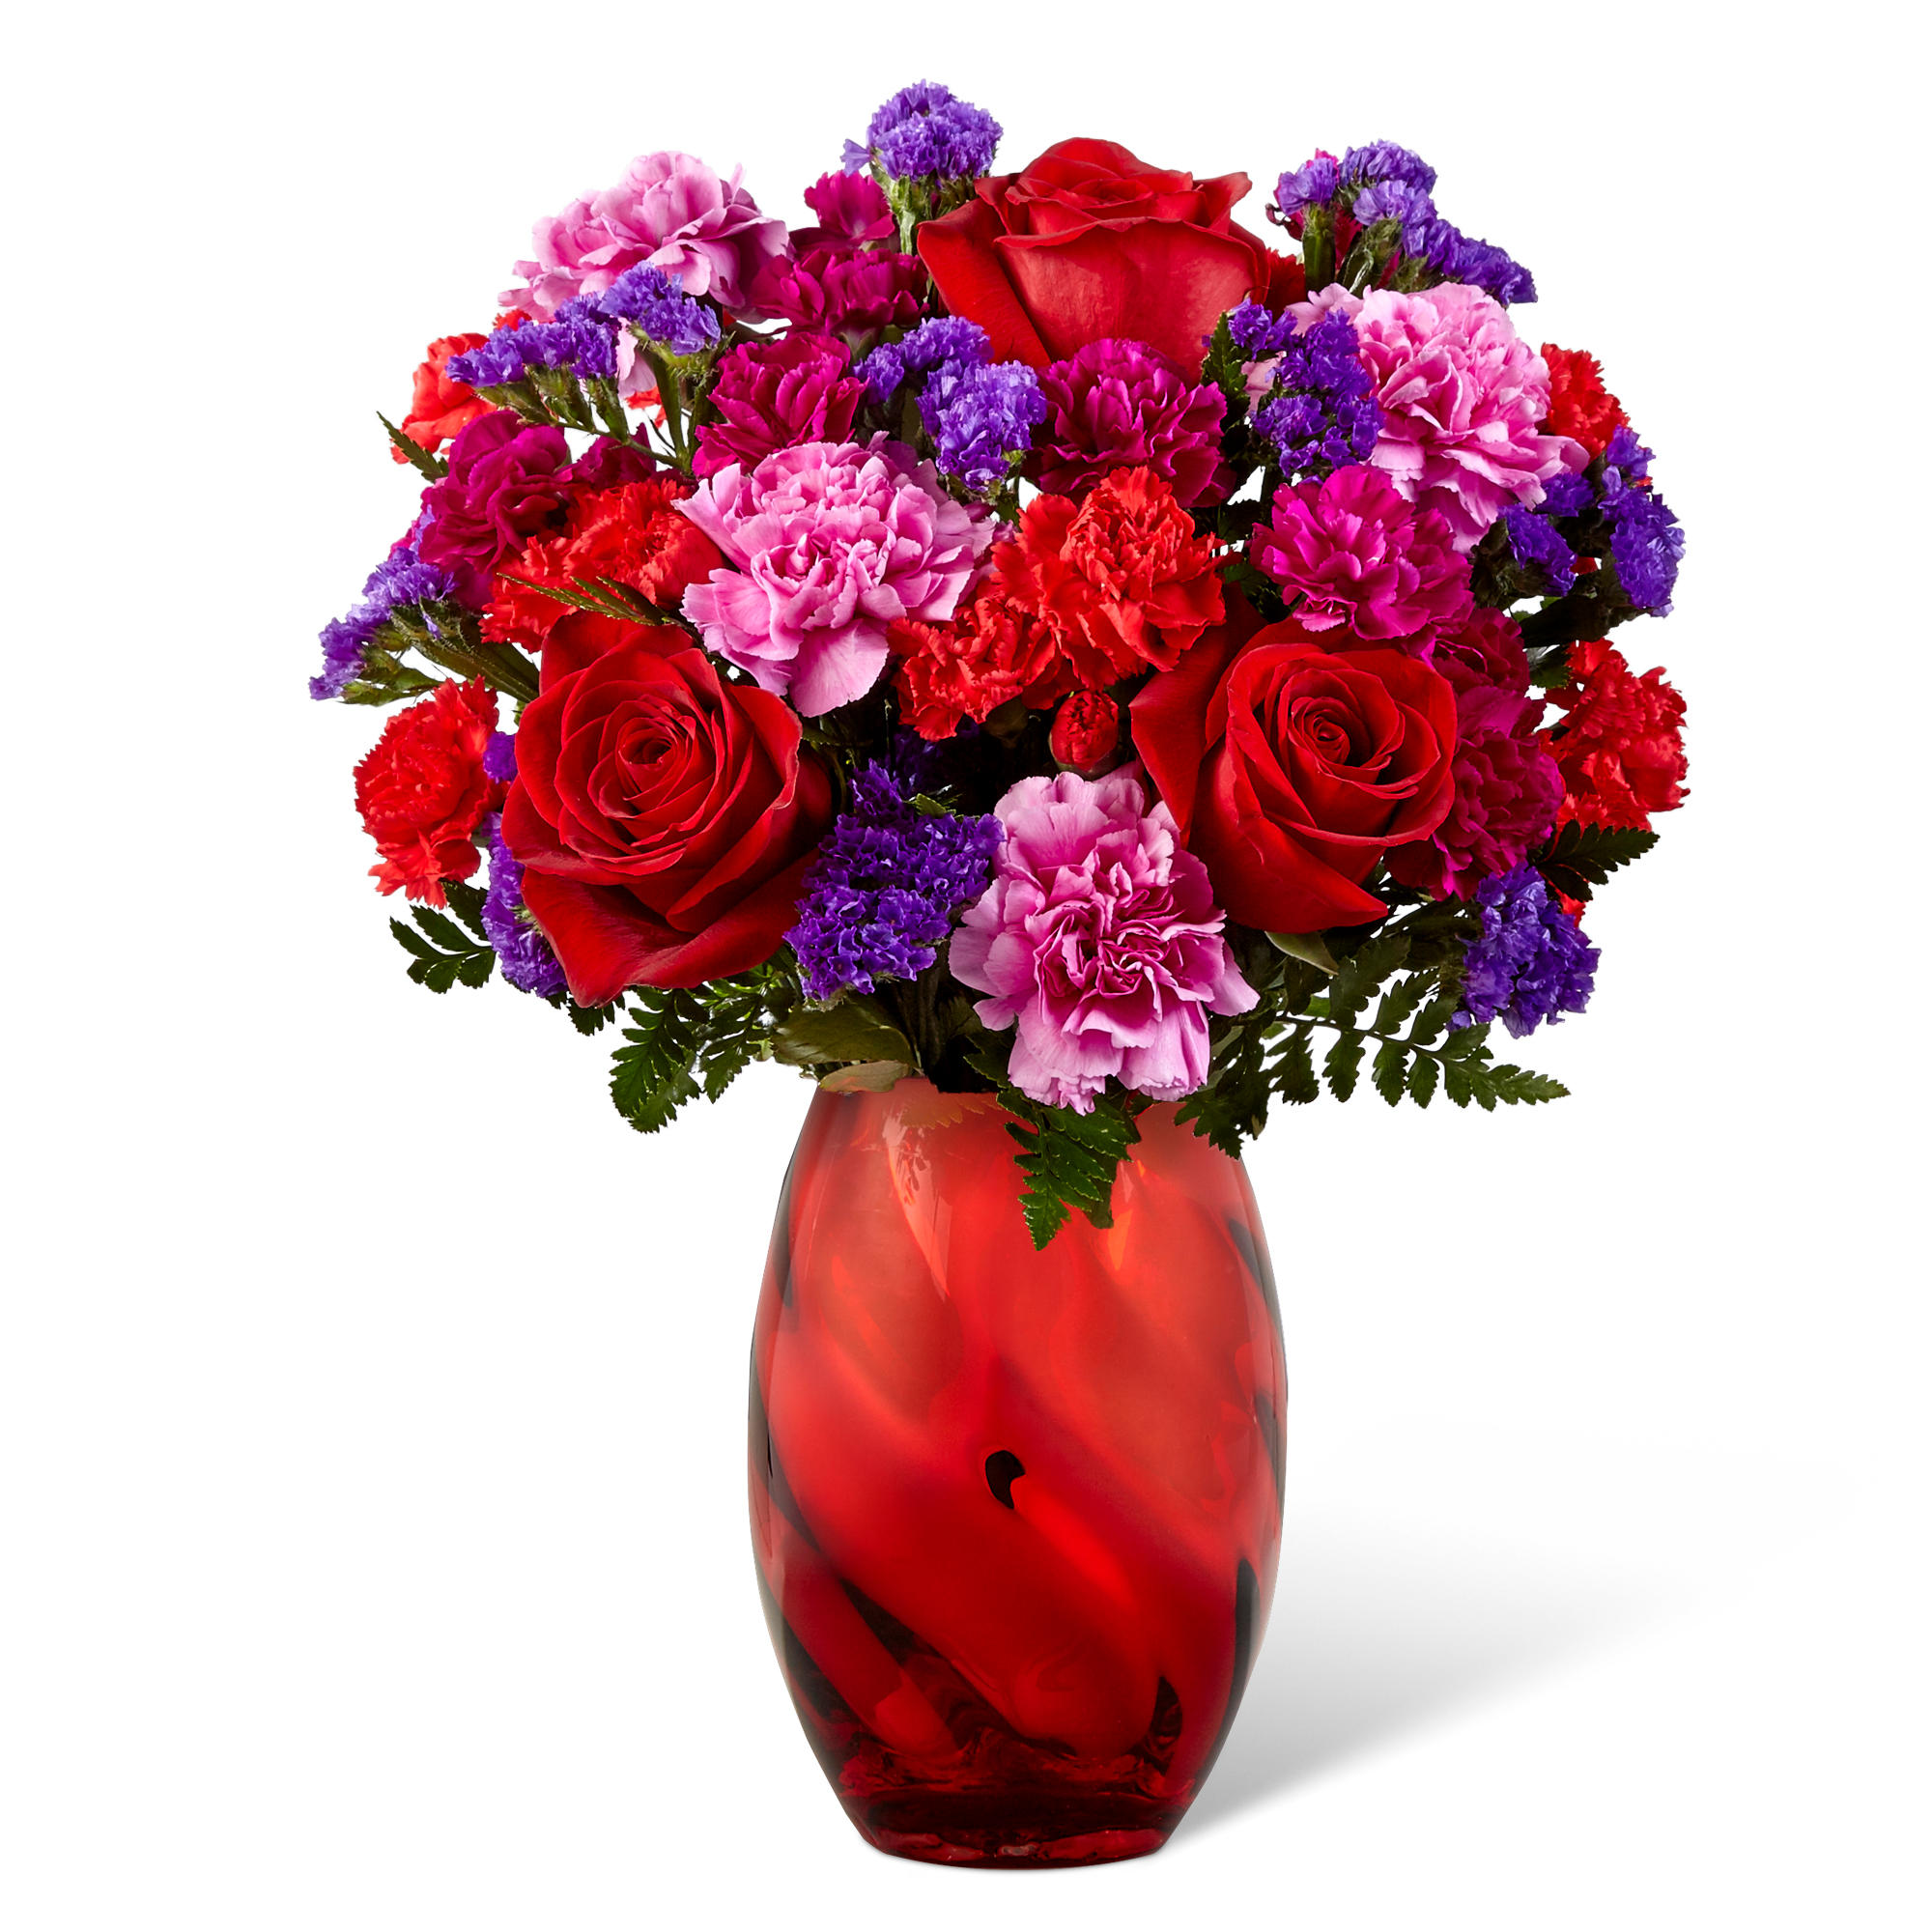 Hirt's Flowers, your modern florist with traditional values.